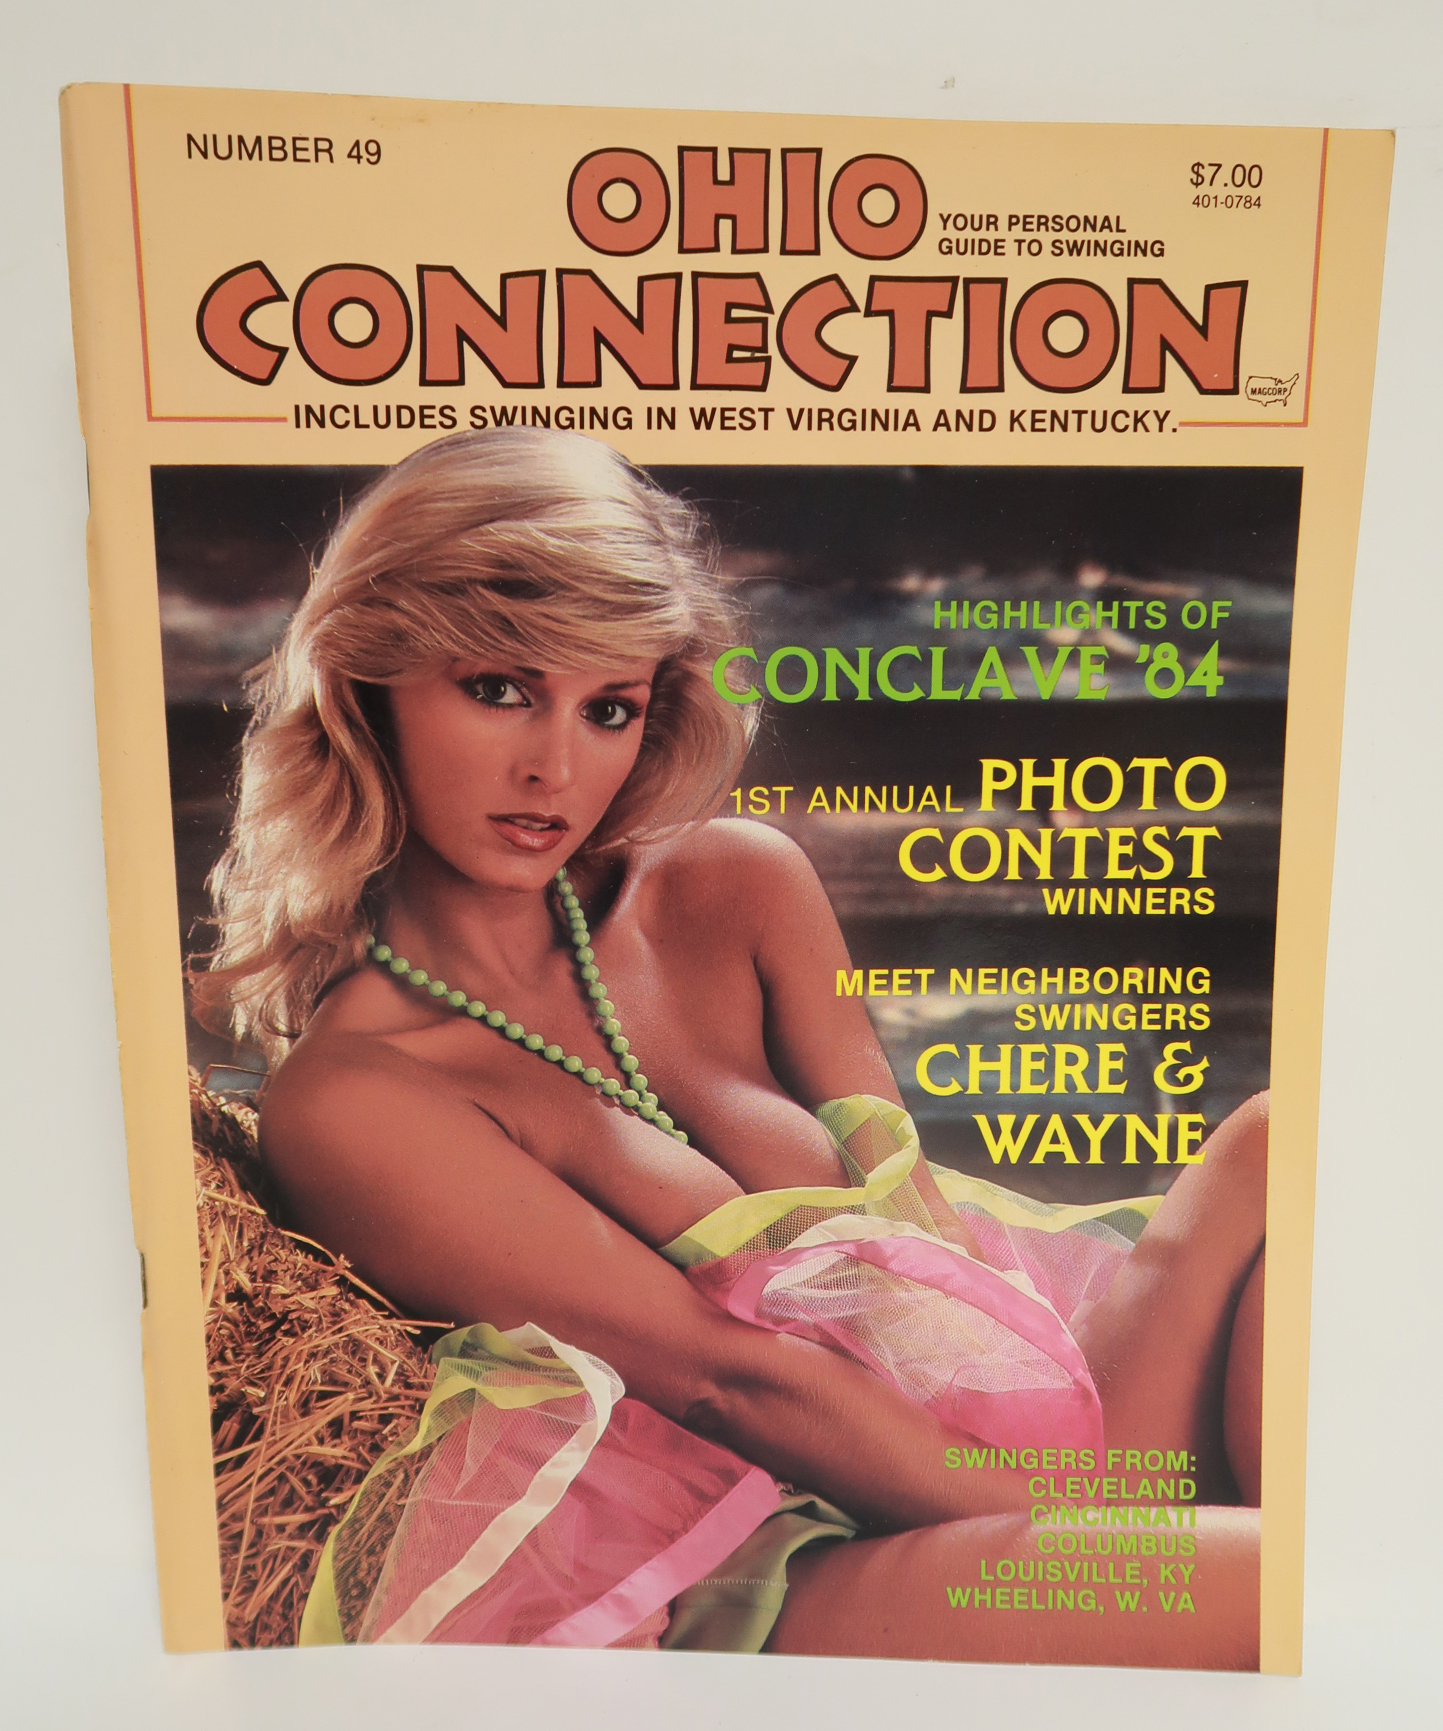 Ohio Connection West Virginia and Kentucky 1984 #49 Contact Personal Ads Kinky Vintage Magazine (1984) Magazineandnbsp;/andnbsp;Periodical AlleyCatEnterprises